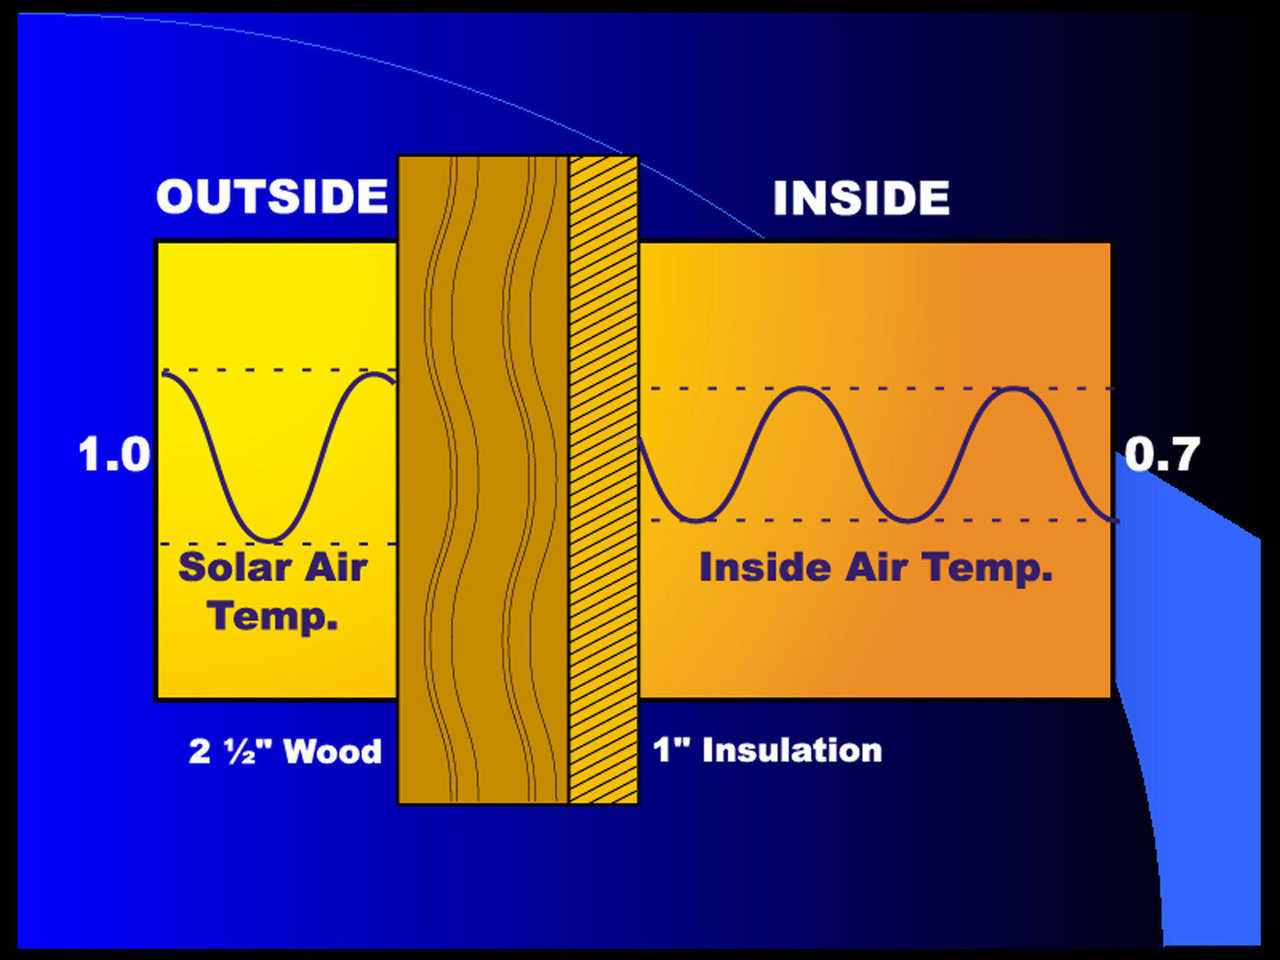 A little Difference — Here we see that with 2 1/2 inches of wood on the outside of a building and one inch of insulation on the inside, the variance in indoor/outdoor temperatures is still negligible.